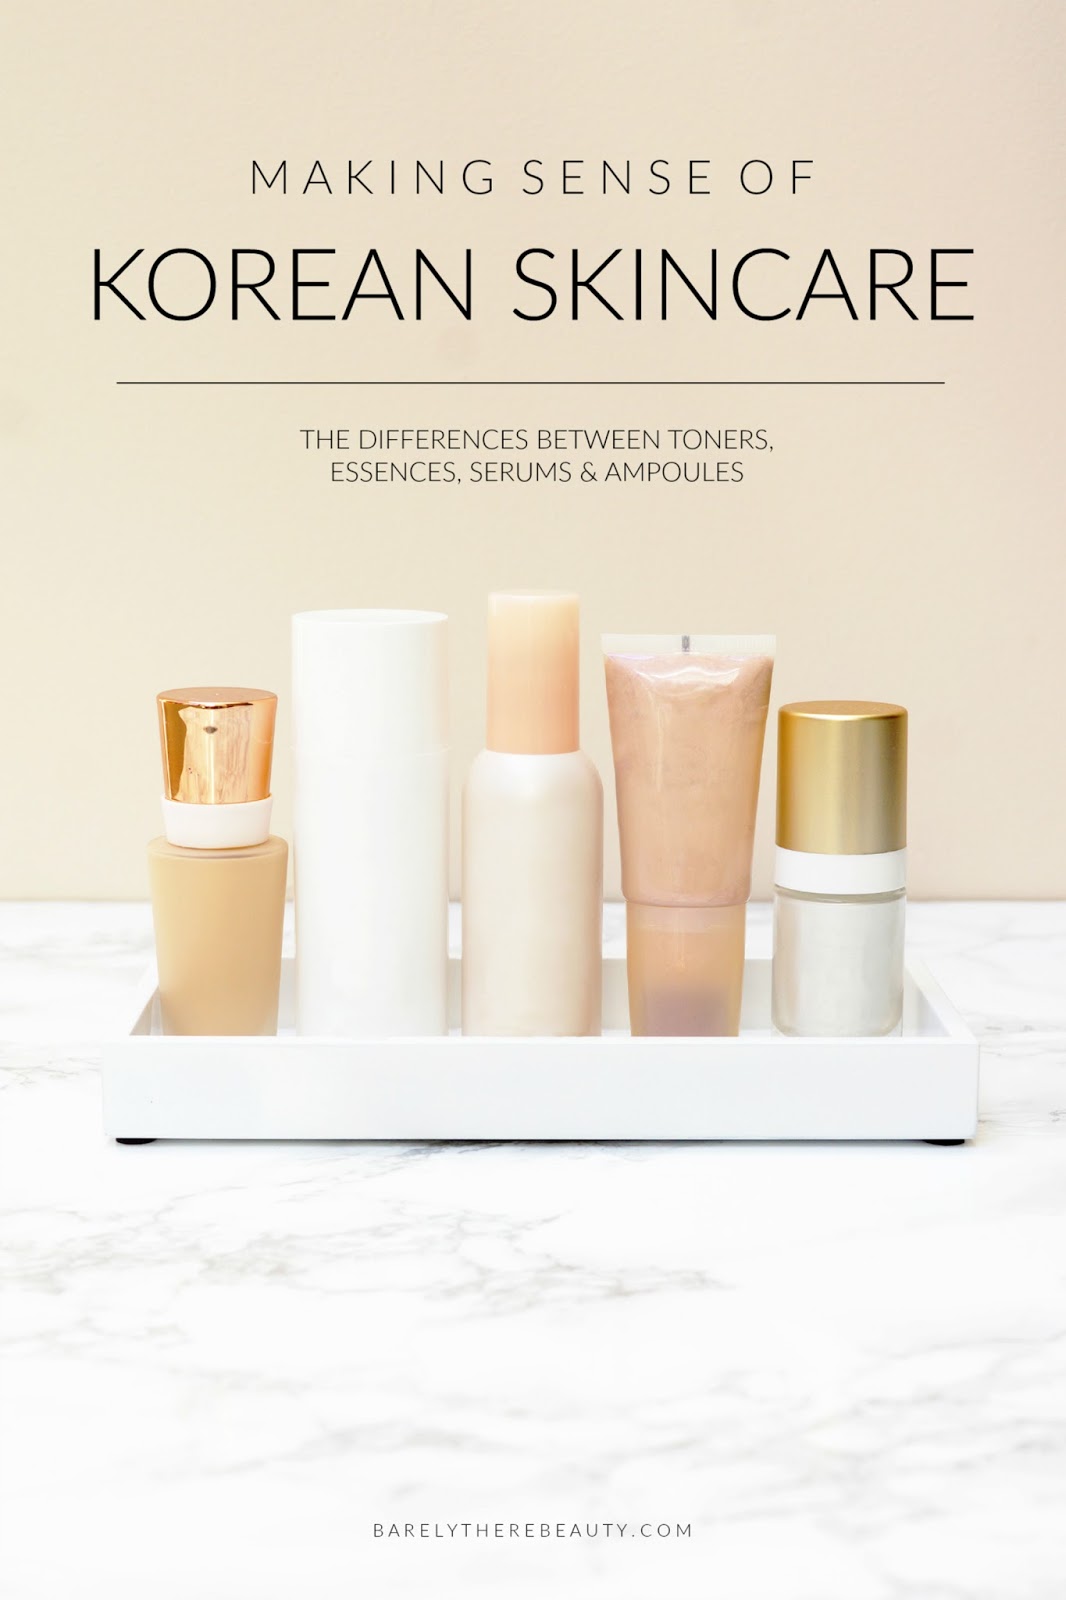 KOREAN SKINCARE 101 | WHAT IS THE DIFFERENCE BETWEEN KOREAN TONERS, SERUMS & AMPOULES? | Beauty - A Lifestyle Blog the Home Counties